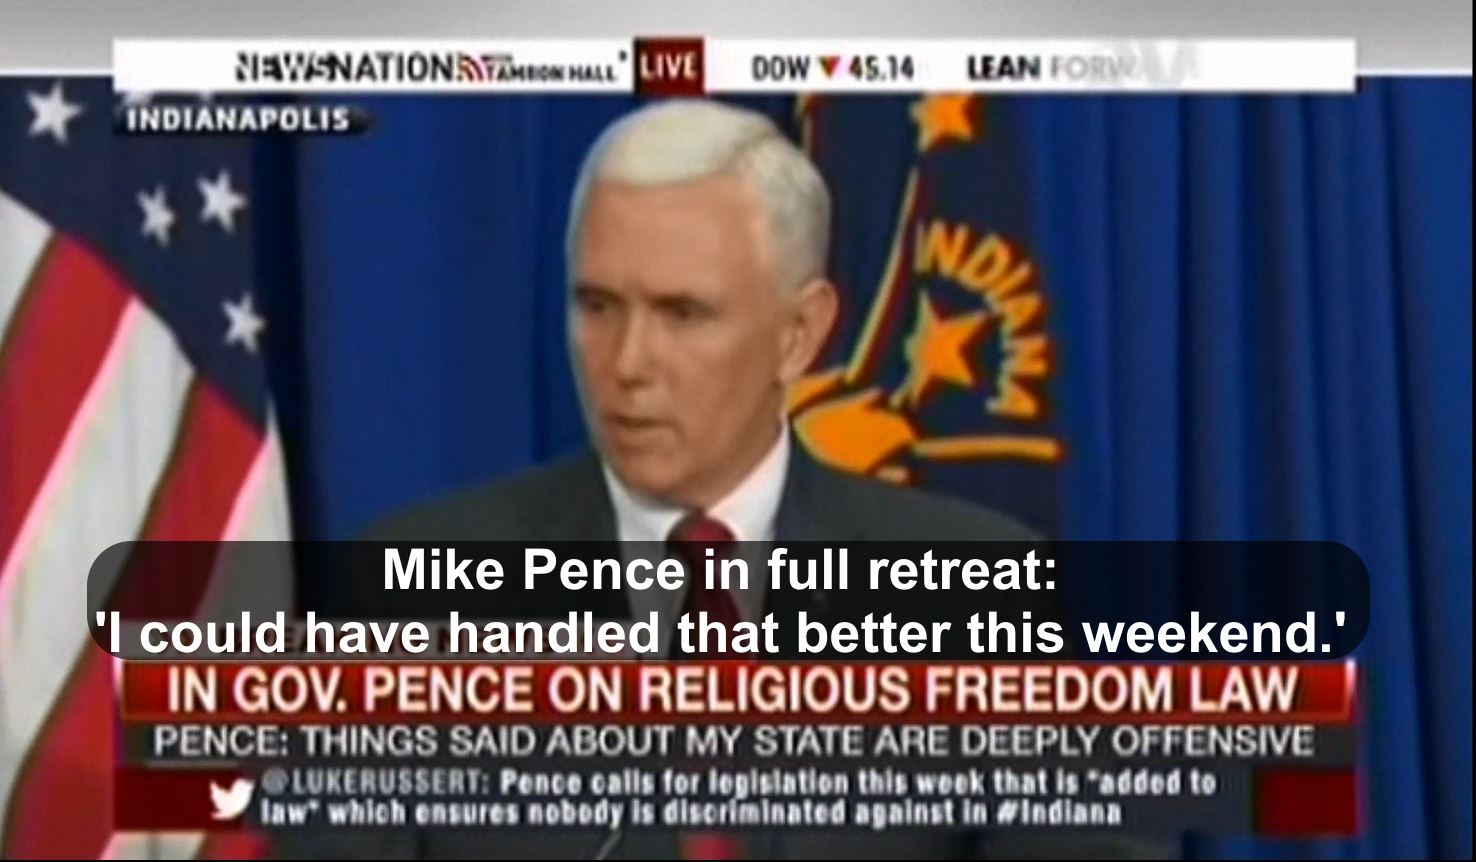 Mike Pence in retreat of Indiana religious restoration act law'